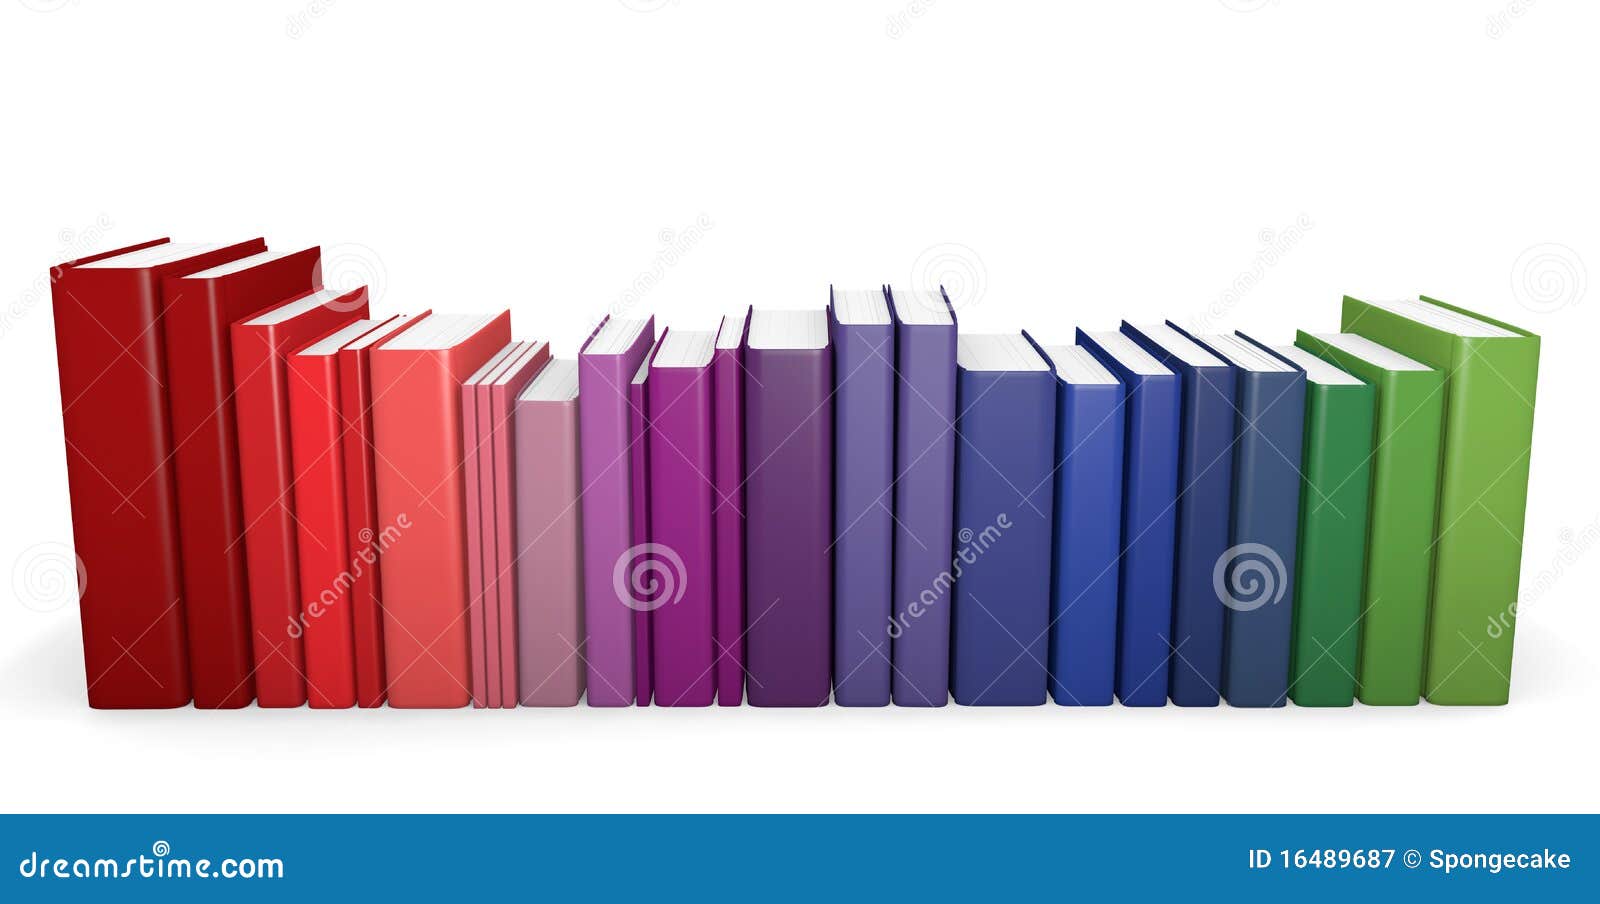 color coordinated books